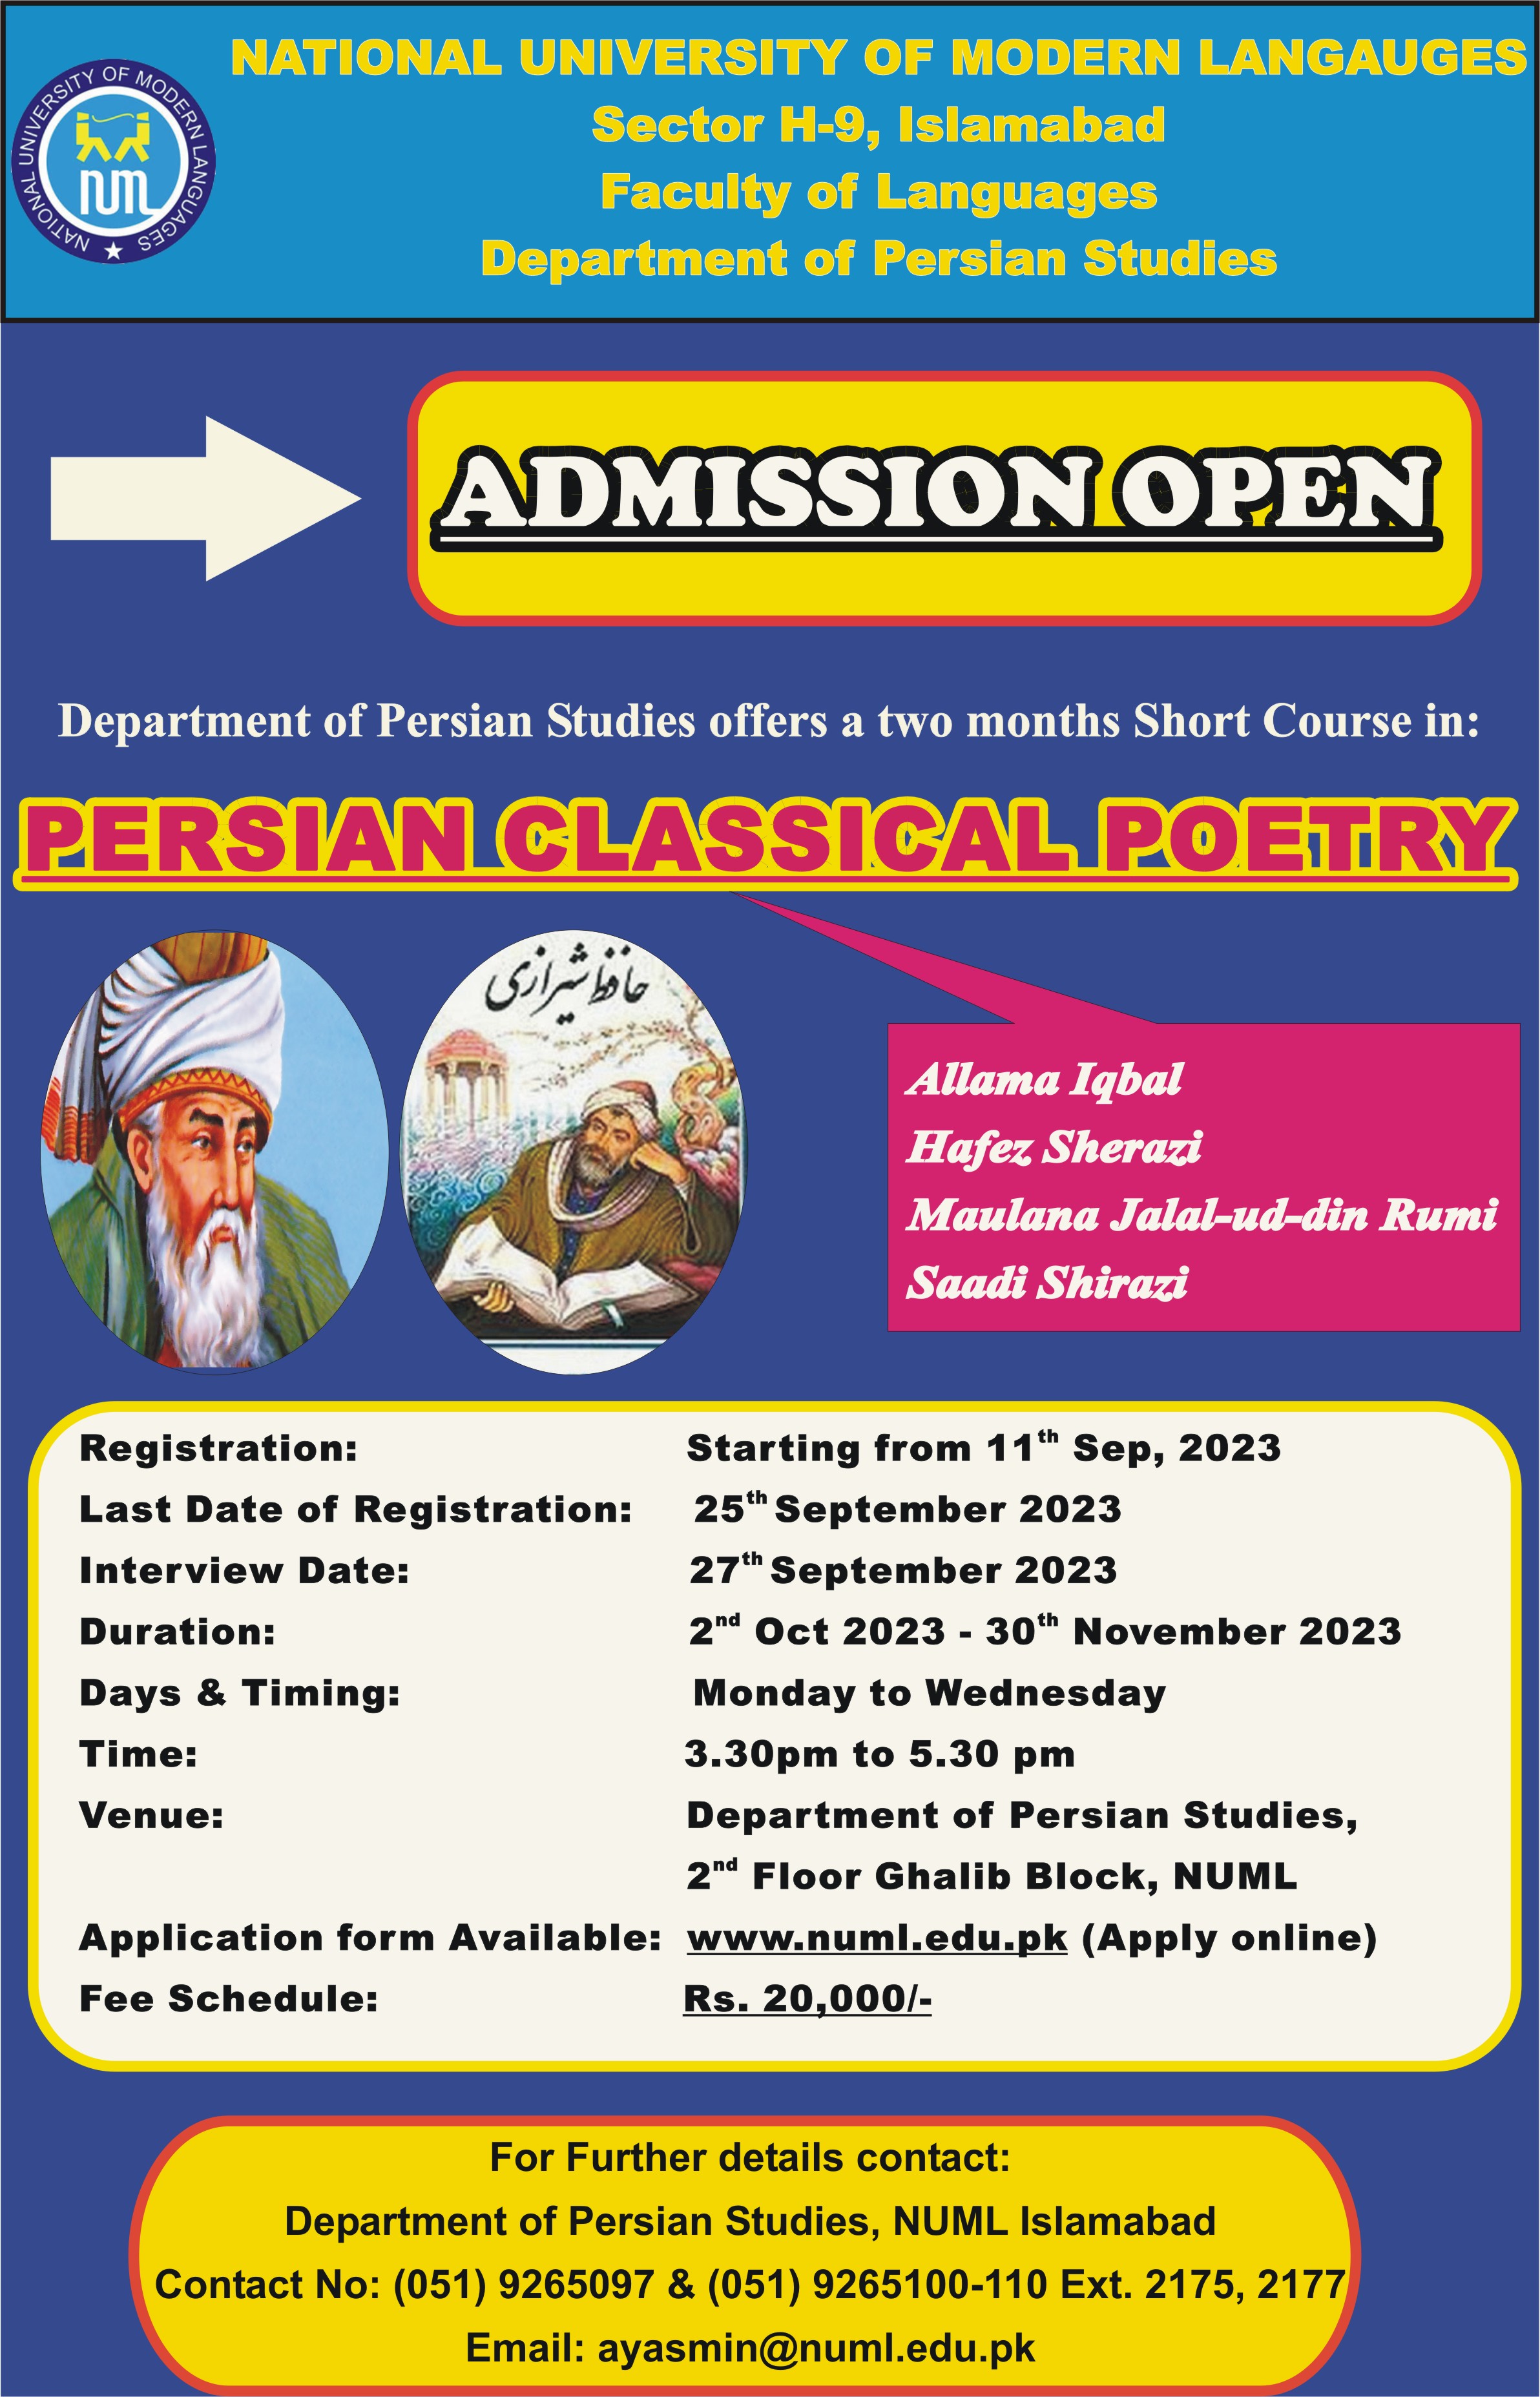 ADMISSION OPEN for PERSIAN CLASSICAL POETRY Course